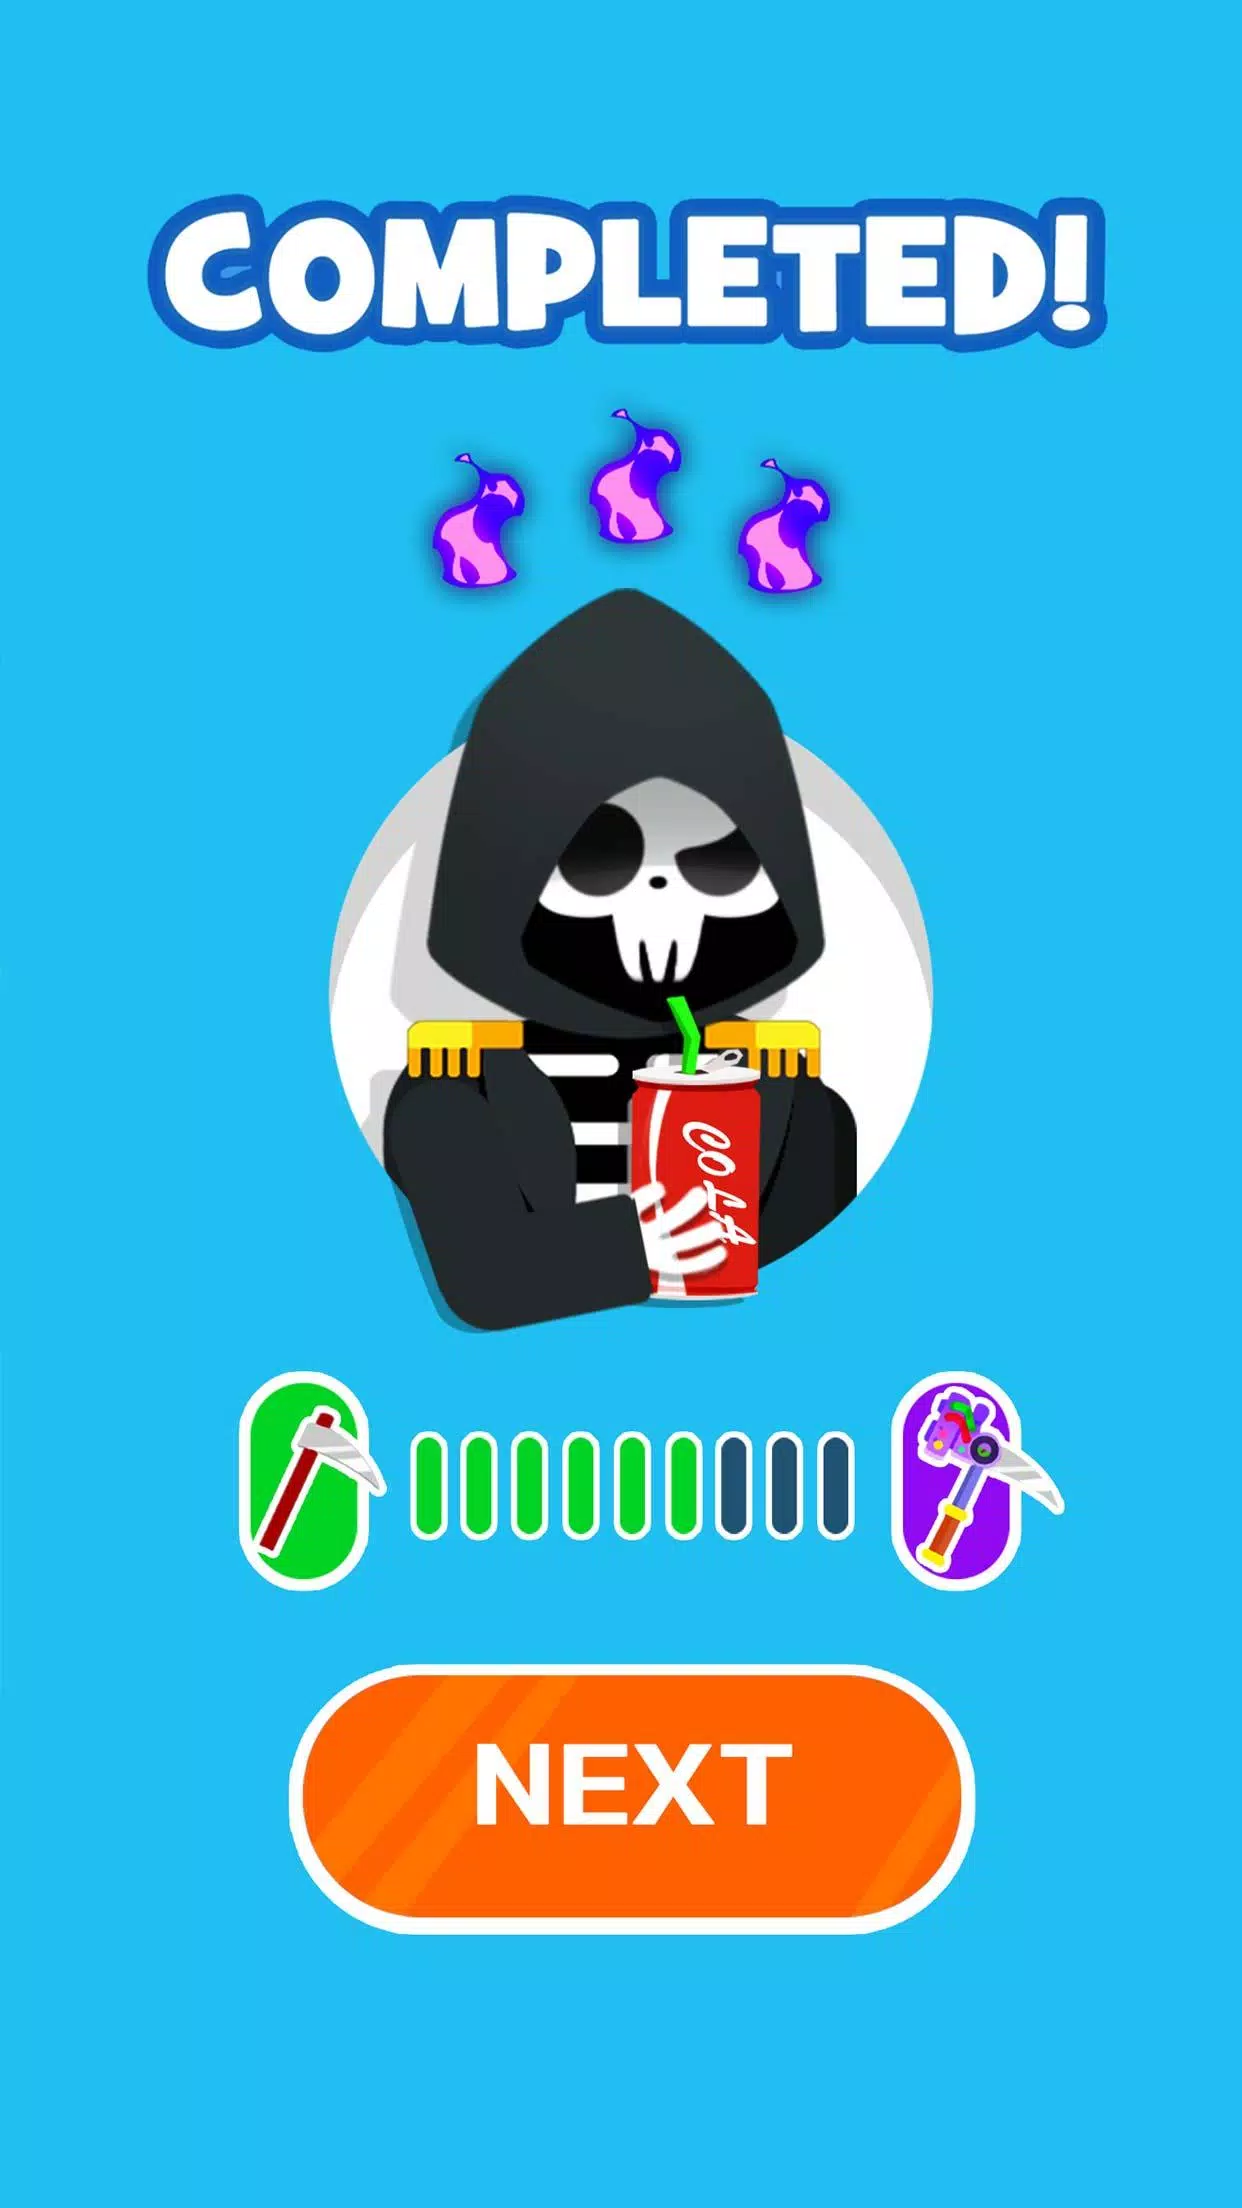 Death Incoming (411) #Android #Game #gameplay #gaming #apk #fat